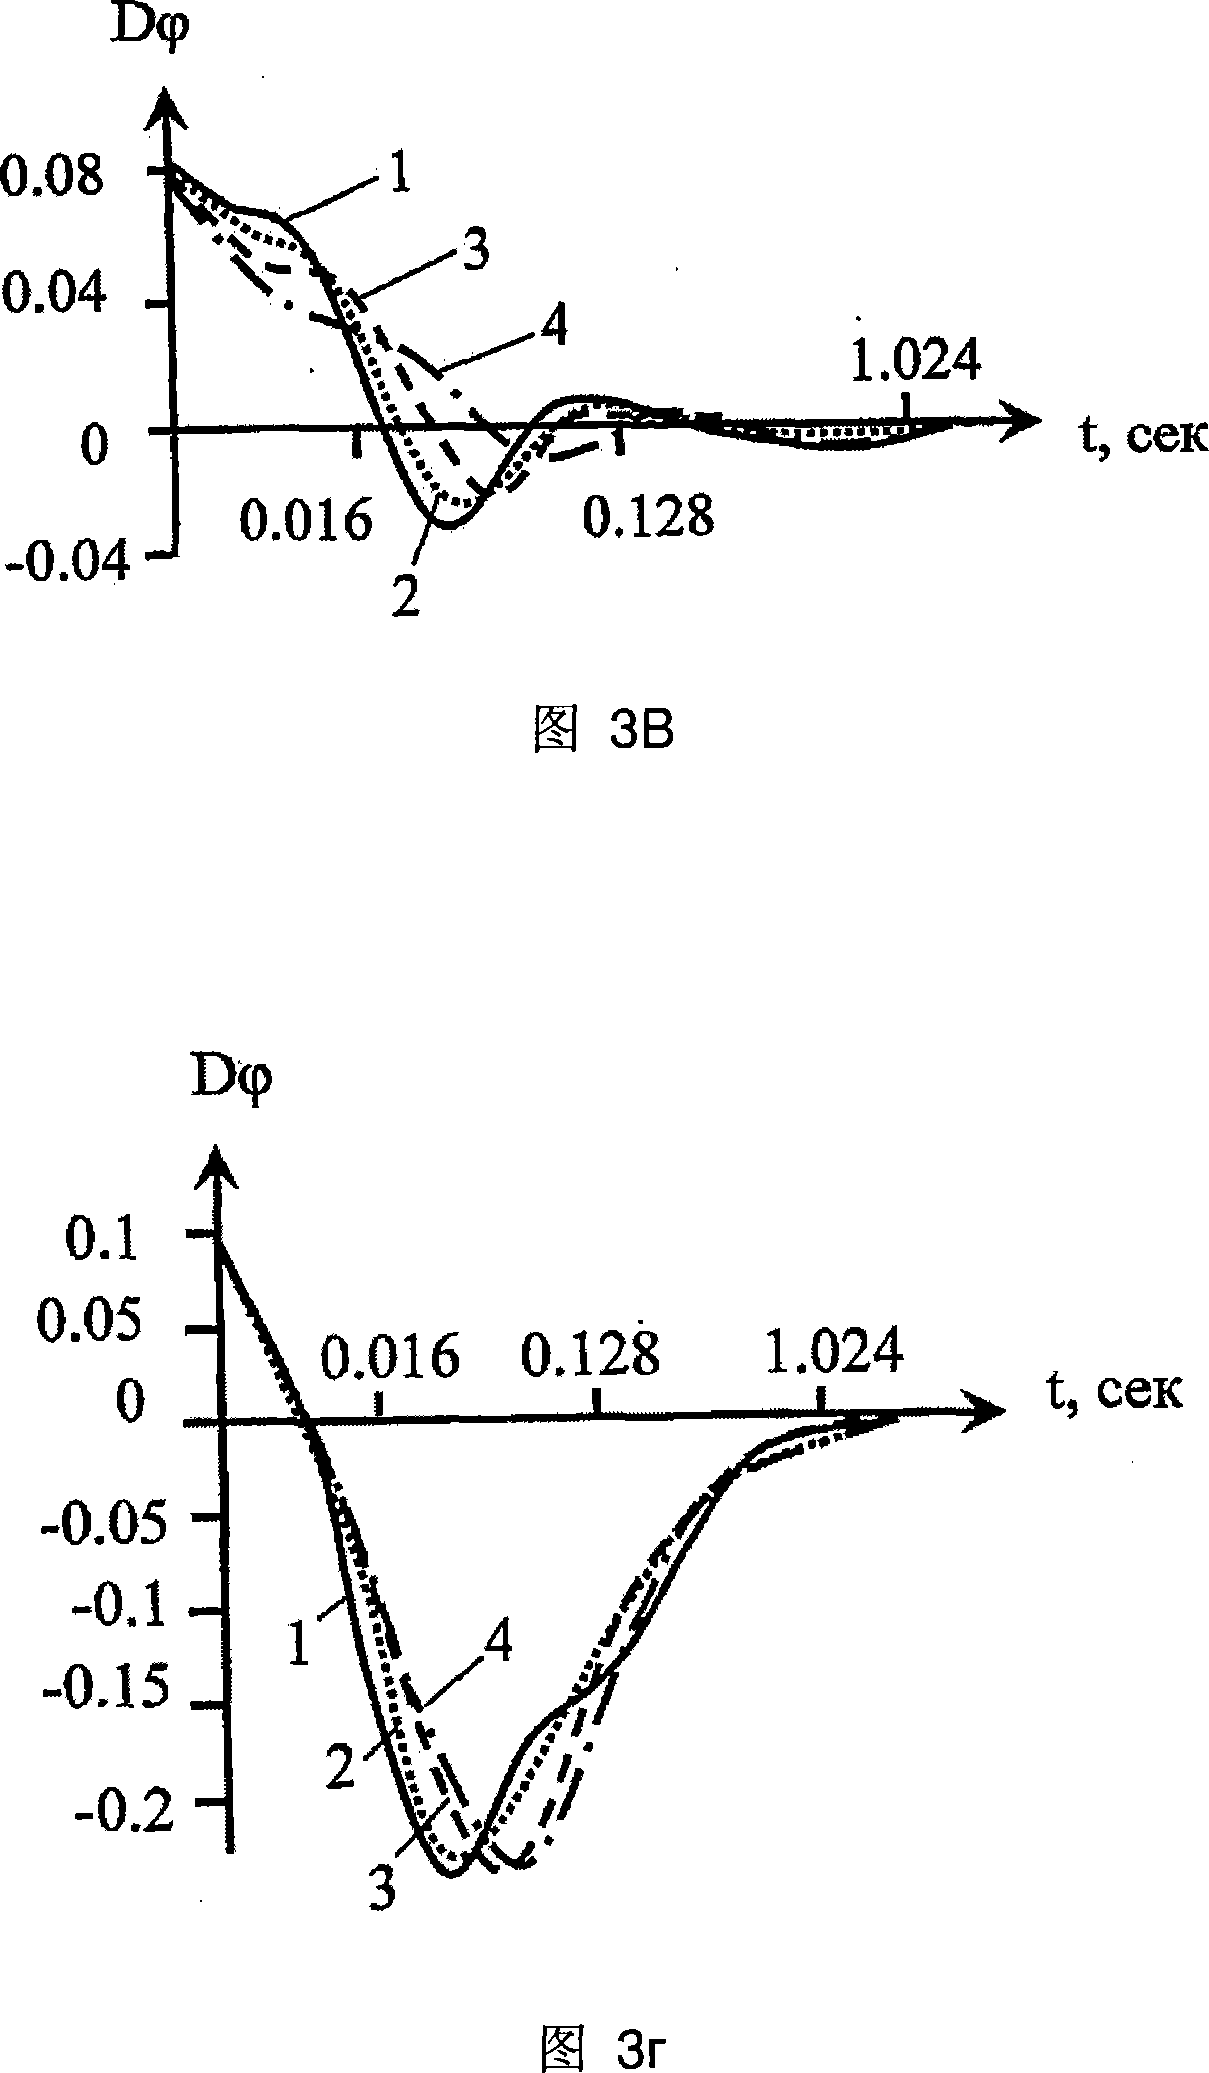 Electromagnetic sounding method using a transient field spatial derivation on several separations